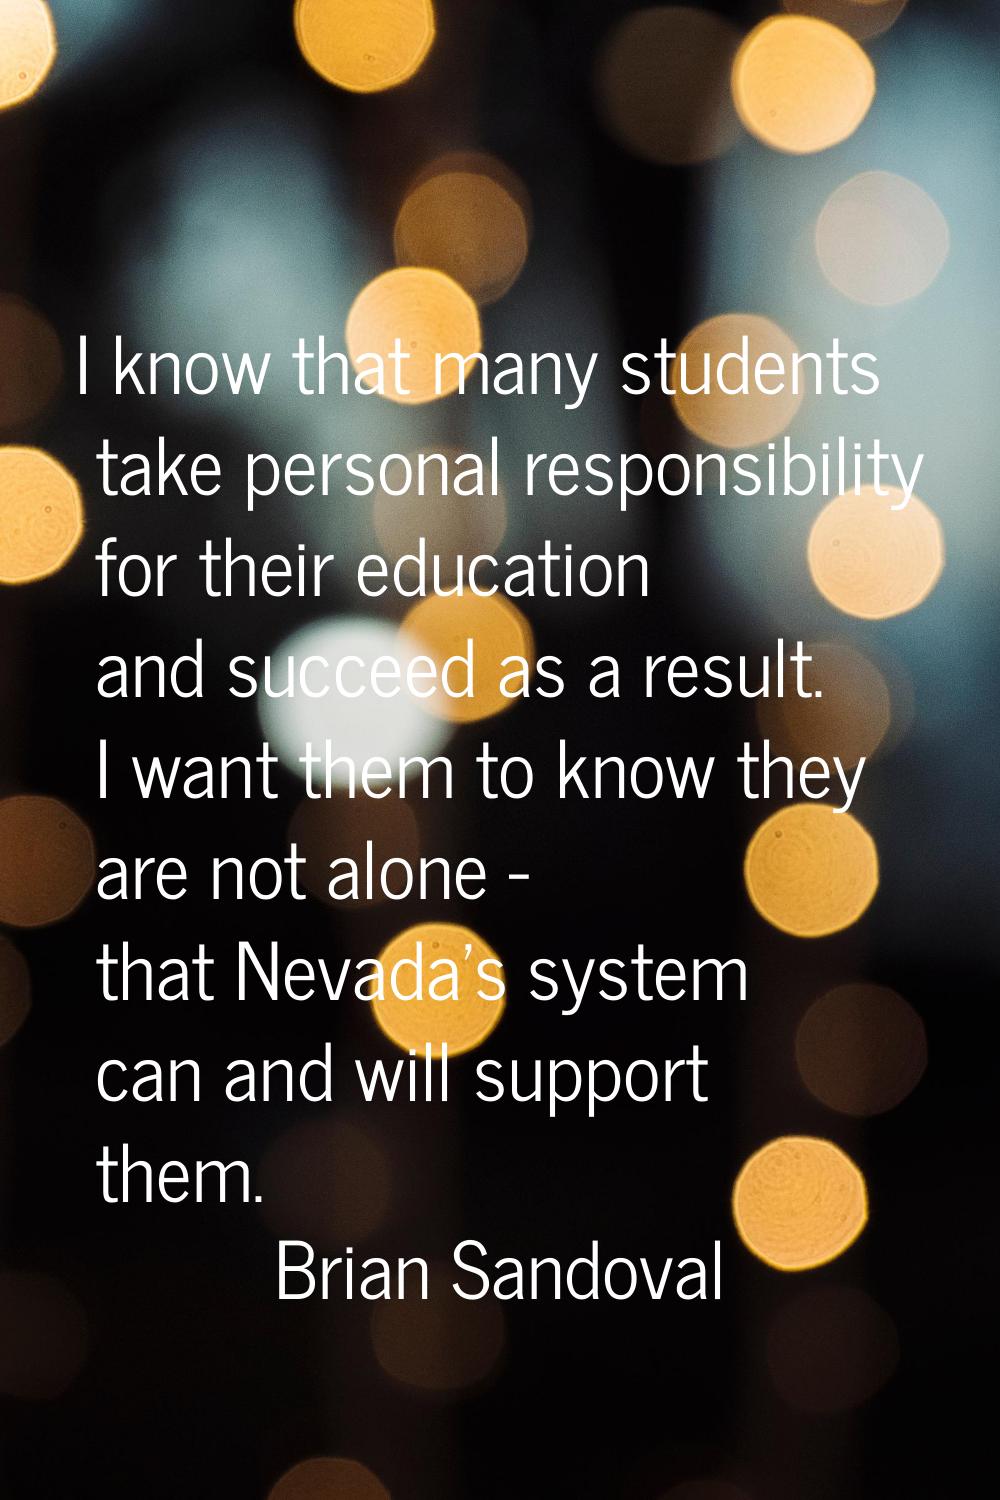 I know that many students take personal responsibility for their education and succeed as a result.